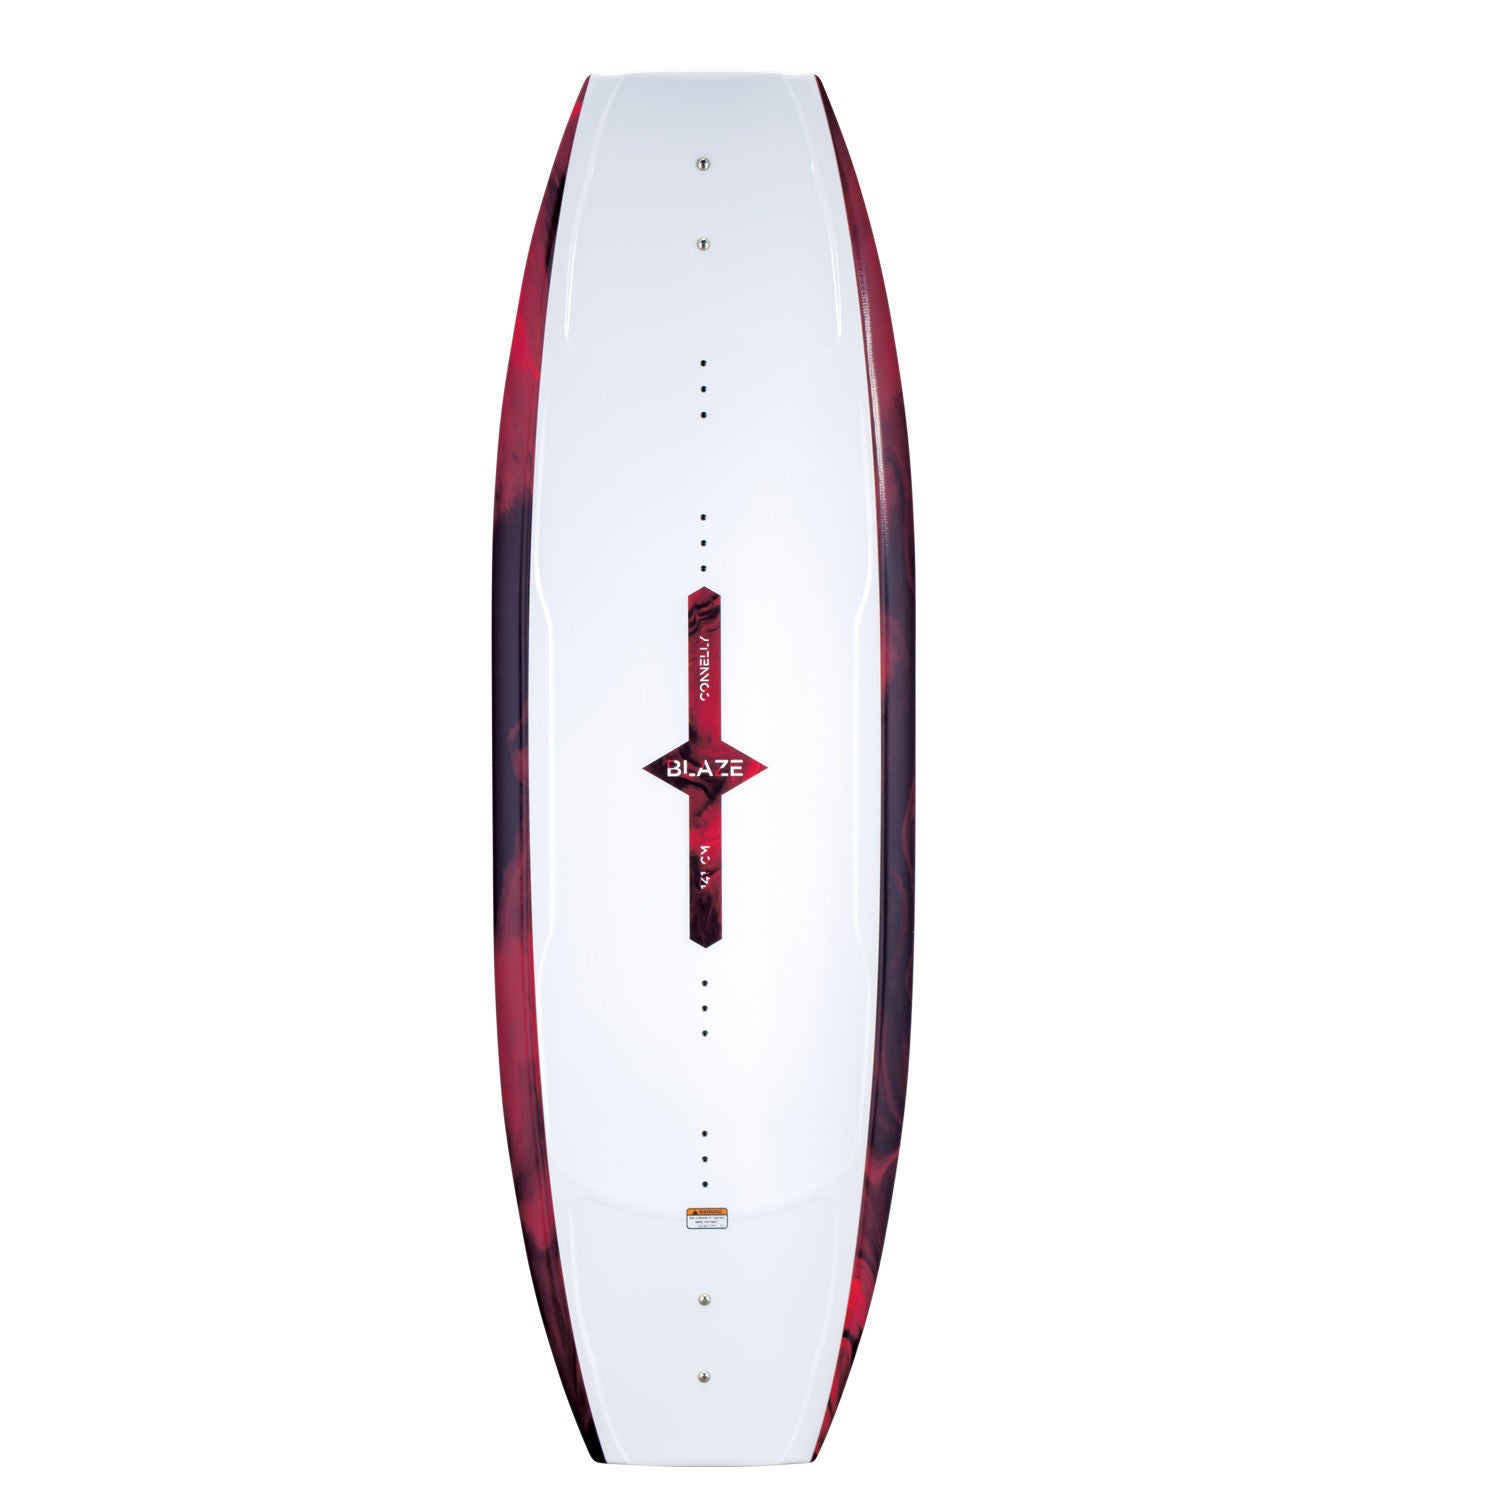 Connelly Wakeboards and Wakesurf Boards | Fast Shipping | Barts 